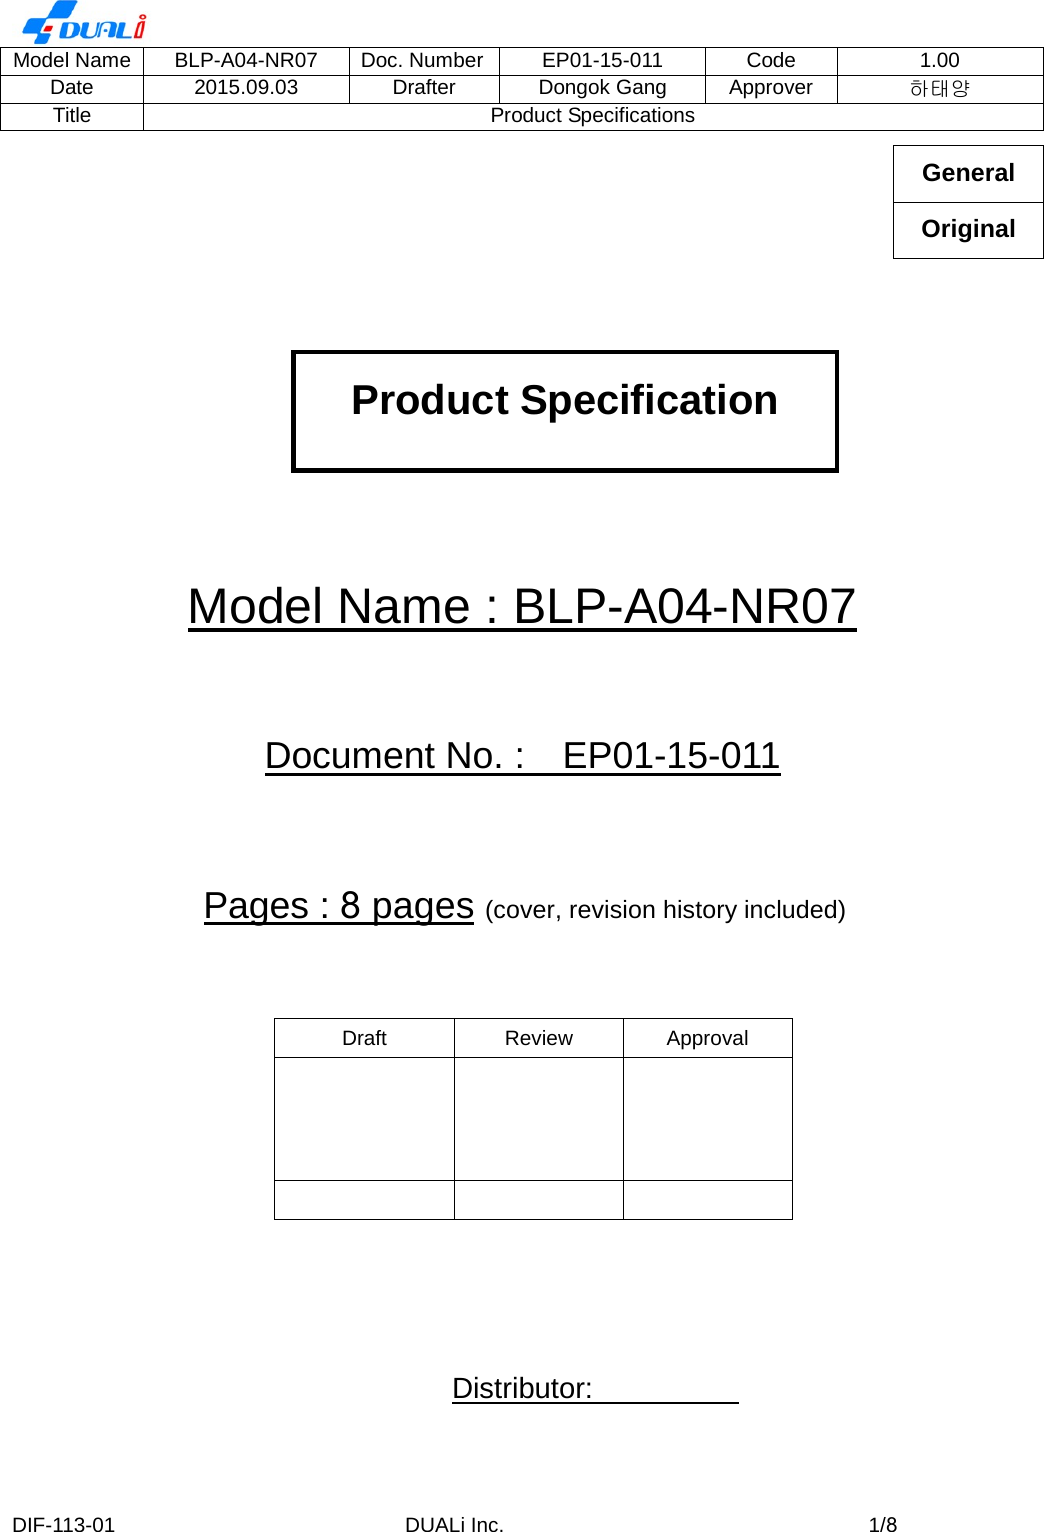 Model Name BLP-A04-NR07 Doc. Number EP01-15-011 Code 1.00 Date 2015.09.03 Drafter Dongok Gang Approver 하태양Title Product Specifications Model Name : BLP-A04-NR07 Document No. :  EP01-15-011 Pages : 8 pages (cover, revision history included)Draft Review Approval Distributor: Product Specification Original General DIF-113-01 DUALi Inc.  1/8 